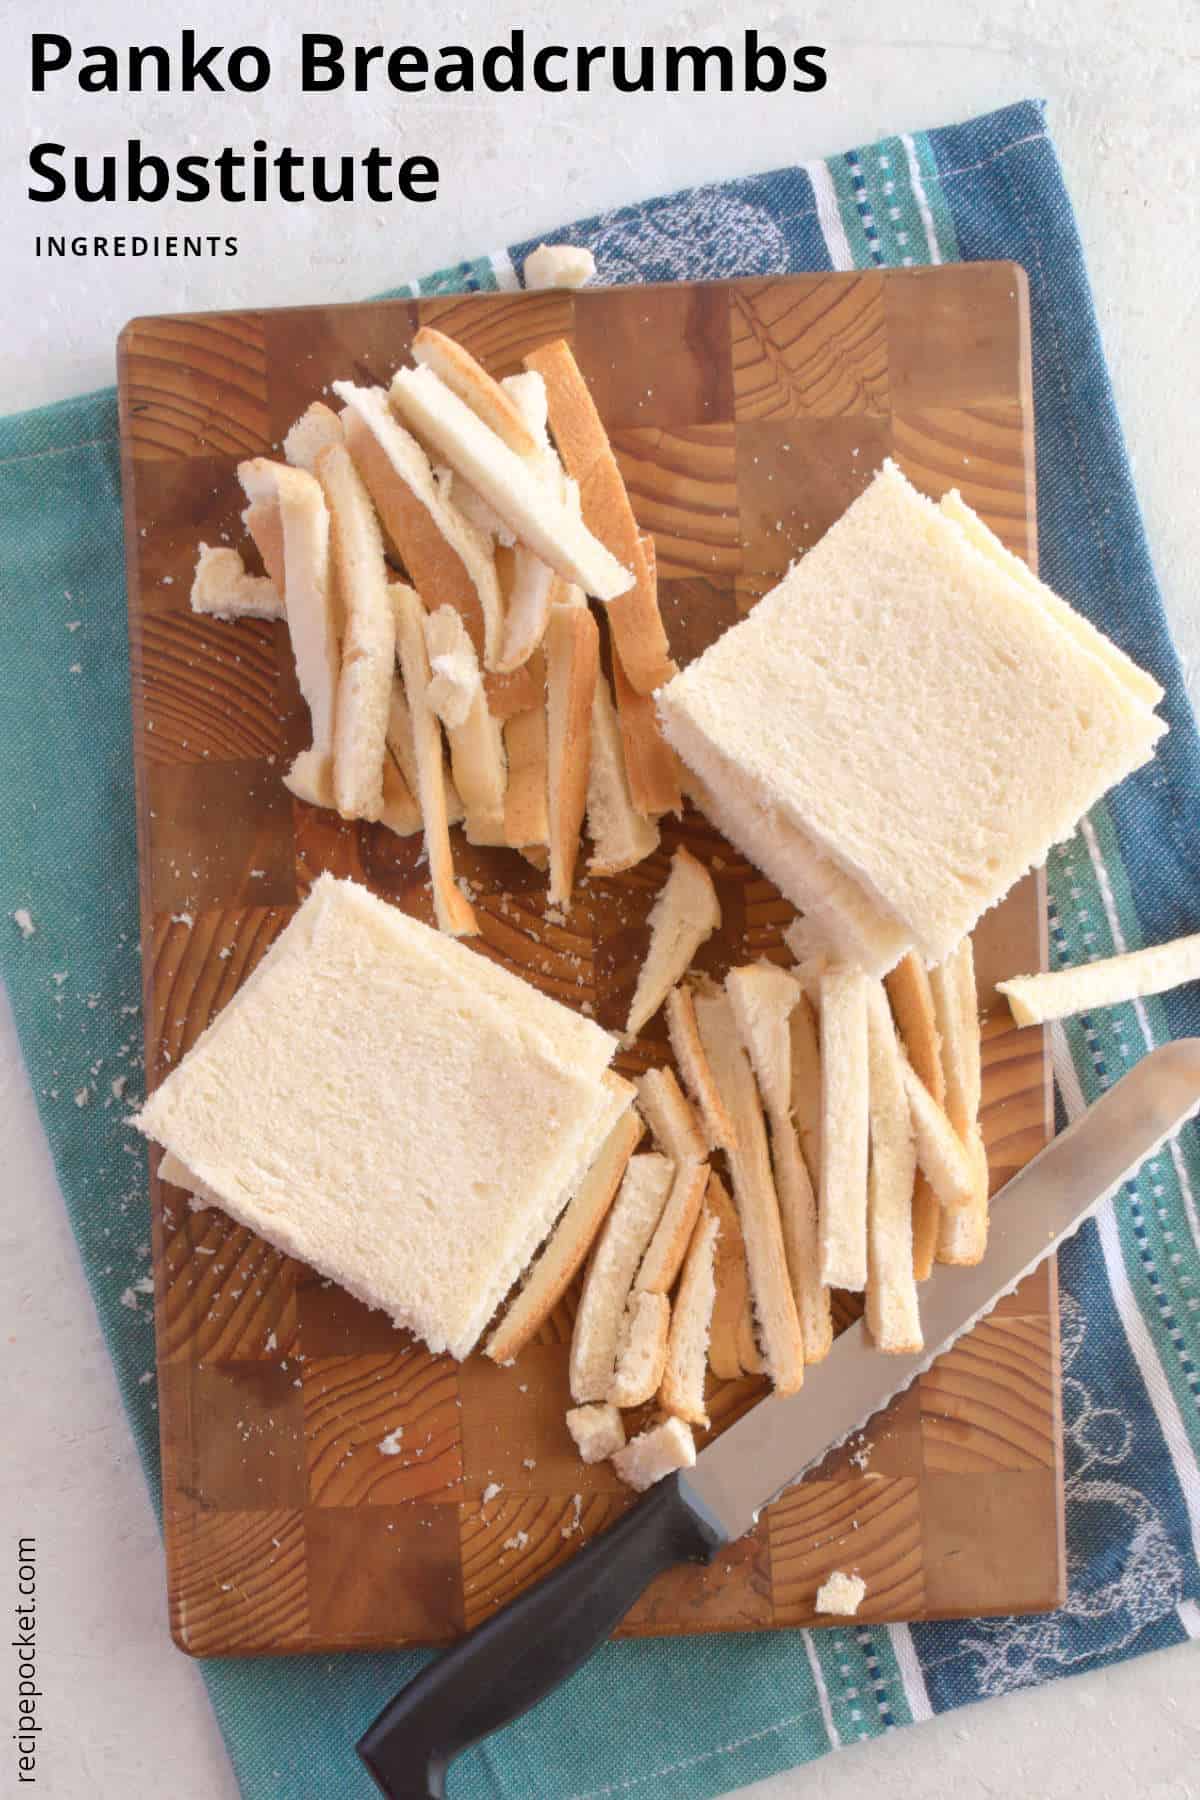 Sliced white bread with crusts removed on a wooden cutting board/